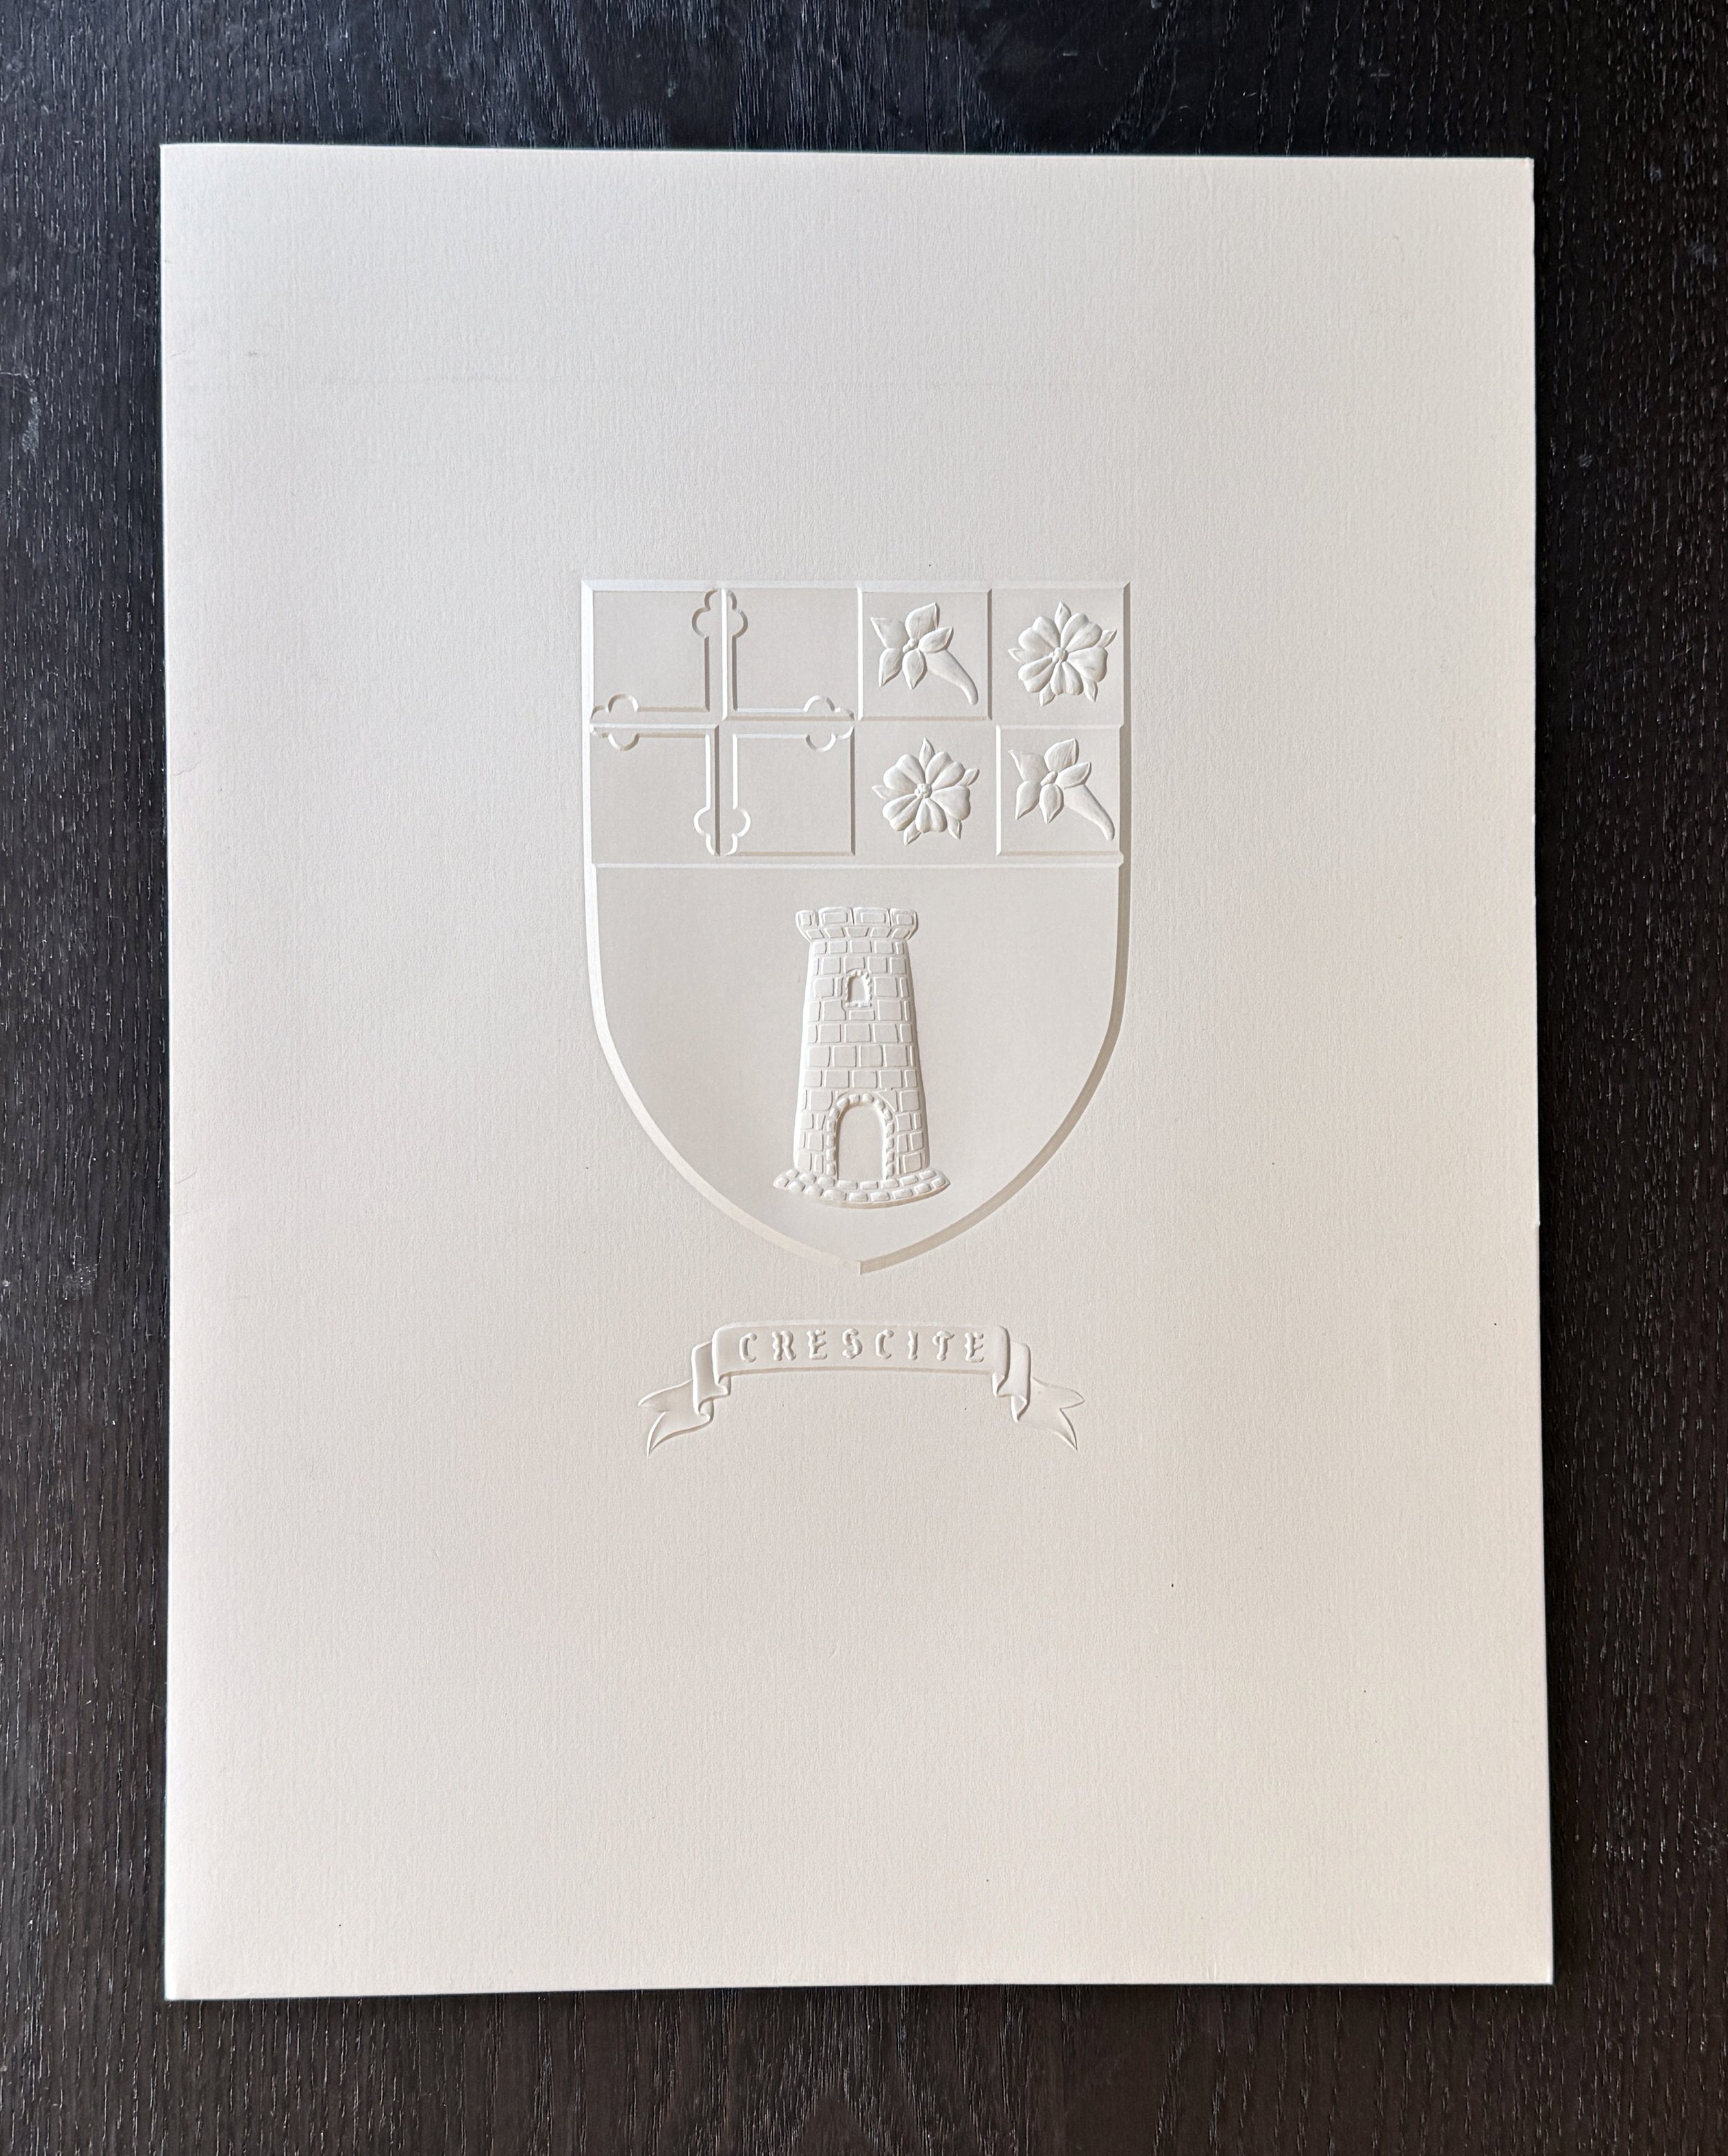 Large pocket folder for The Heights School with crest blind-embossed on cover